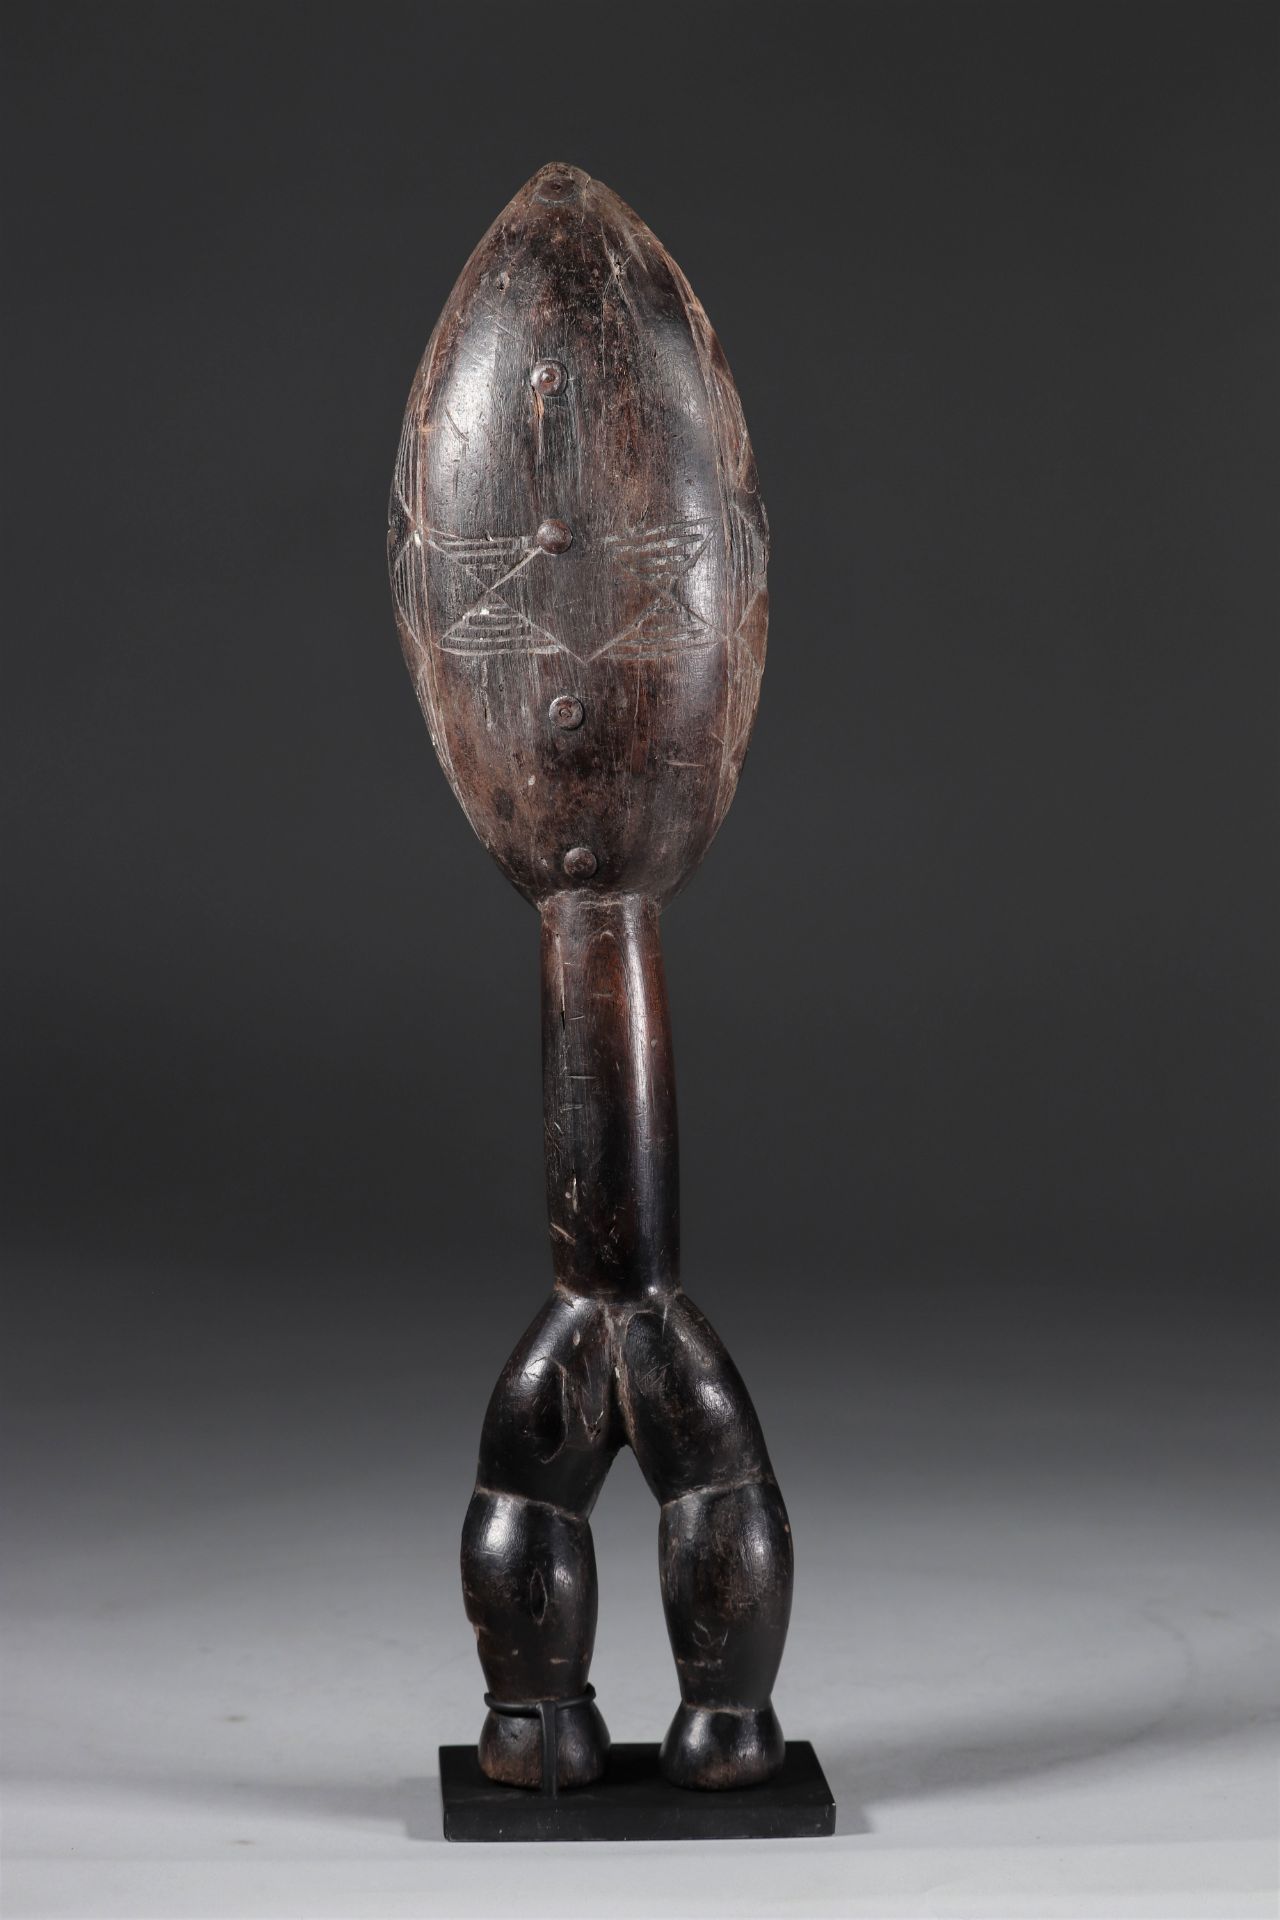 Ceremonial spoon Dan early 20th century beautiful patina - private collection Belgium - Image 4 of 6